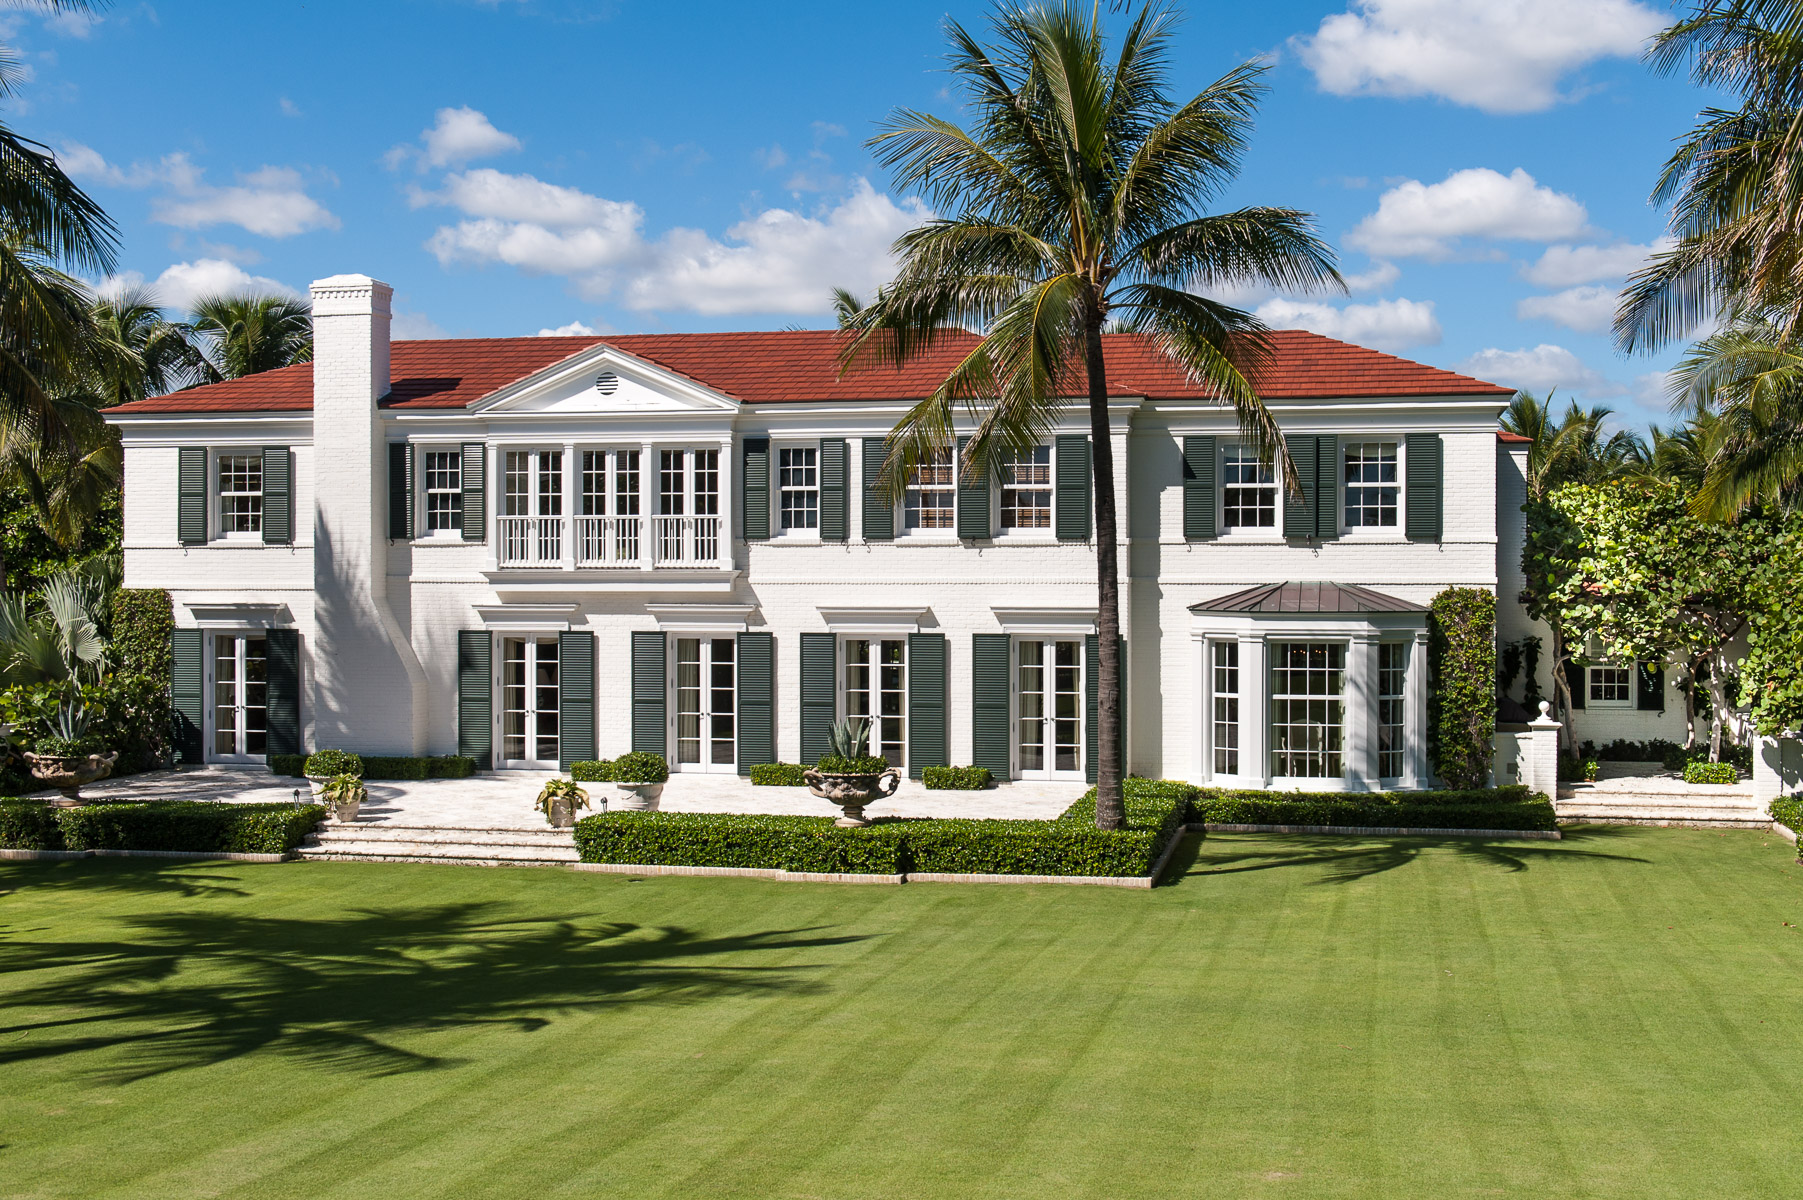 a large white house with palm trees in the lawn.